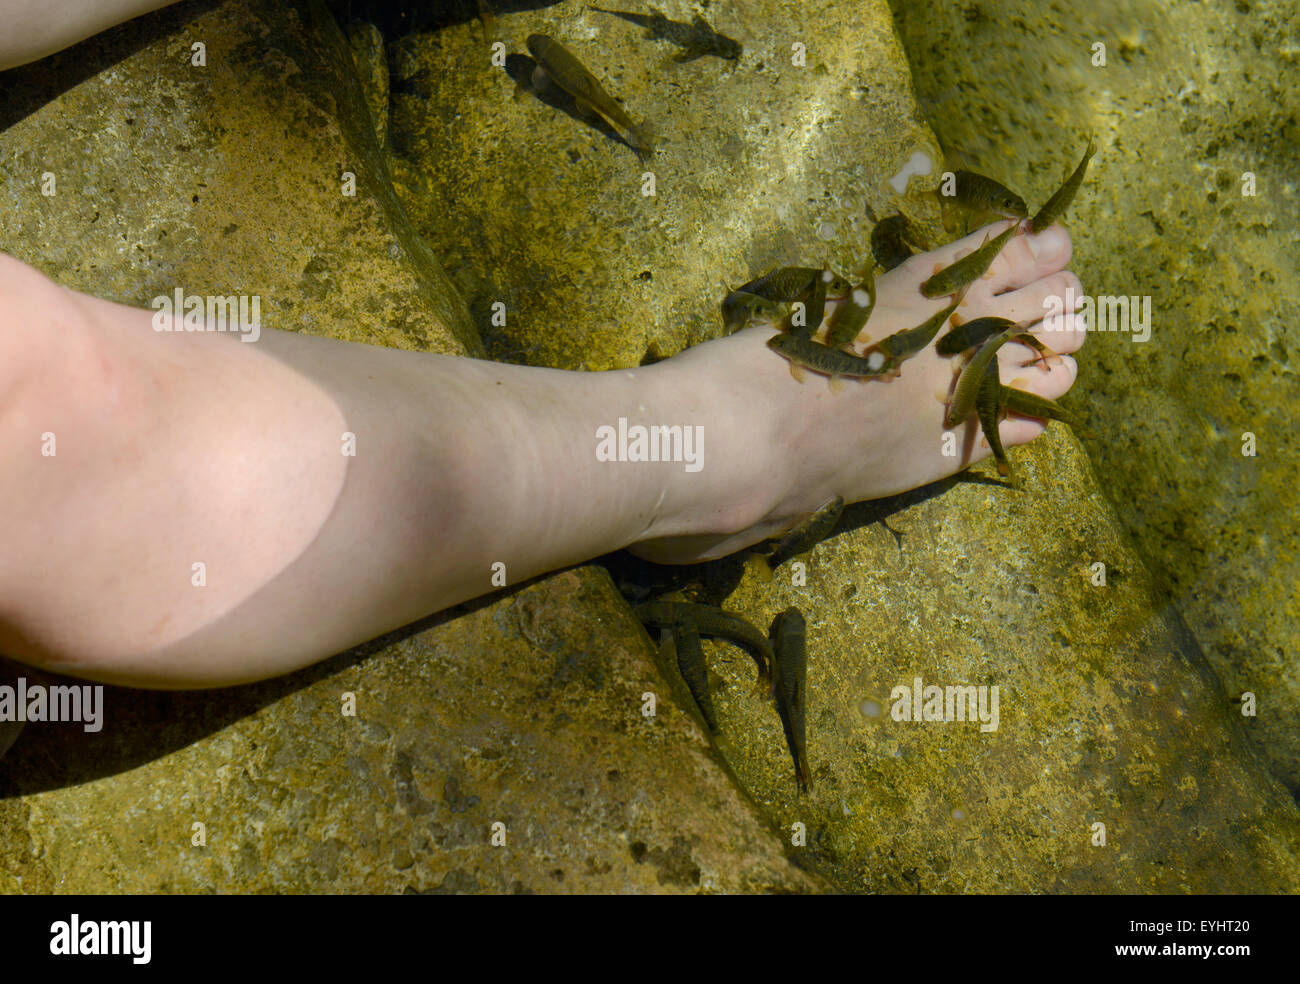 Banjaran hot springs, Garra rufa or doctor fish nibble on the foot of a person receiving a spa treatment, Malaysia Stock Photo